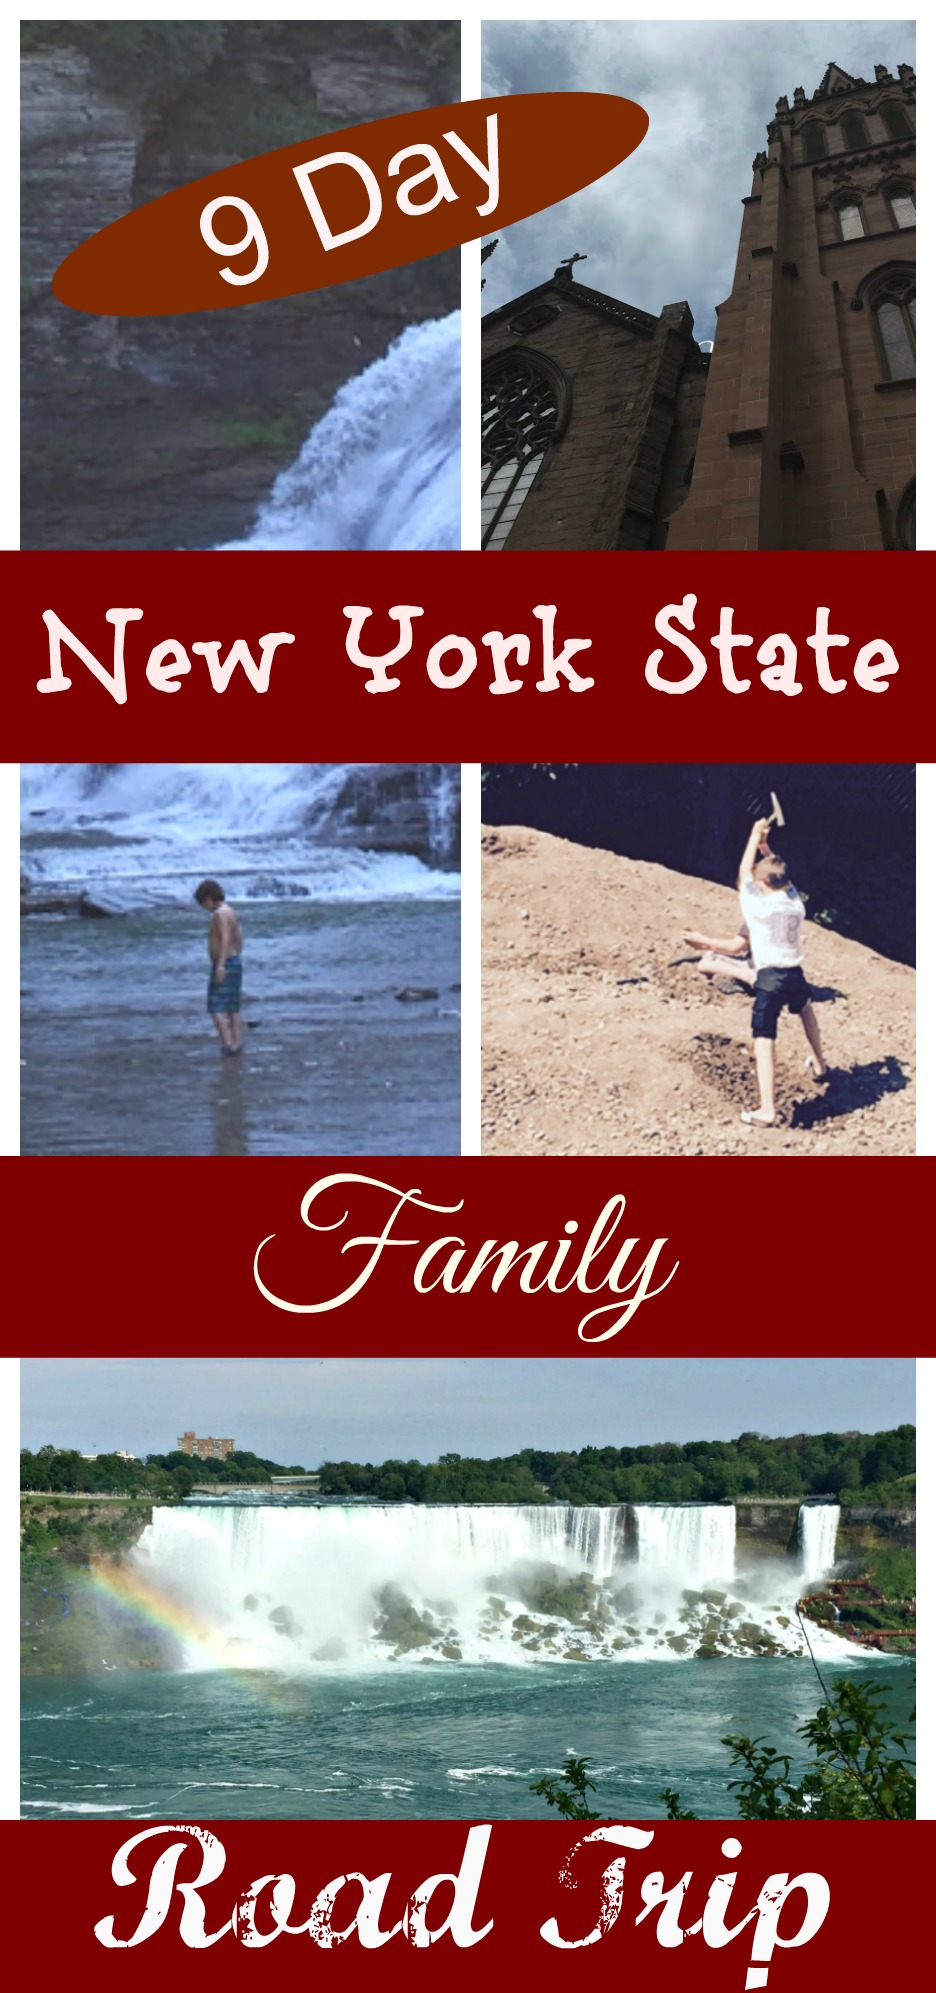 9 Day new york state family road trip